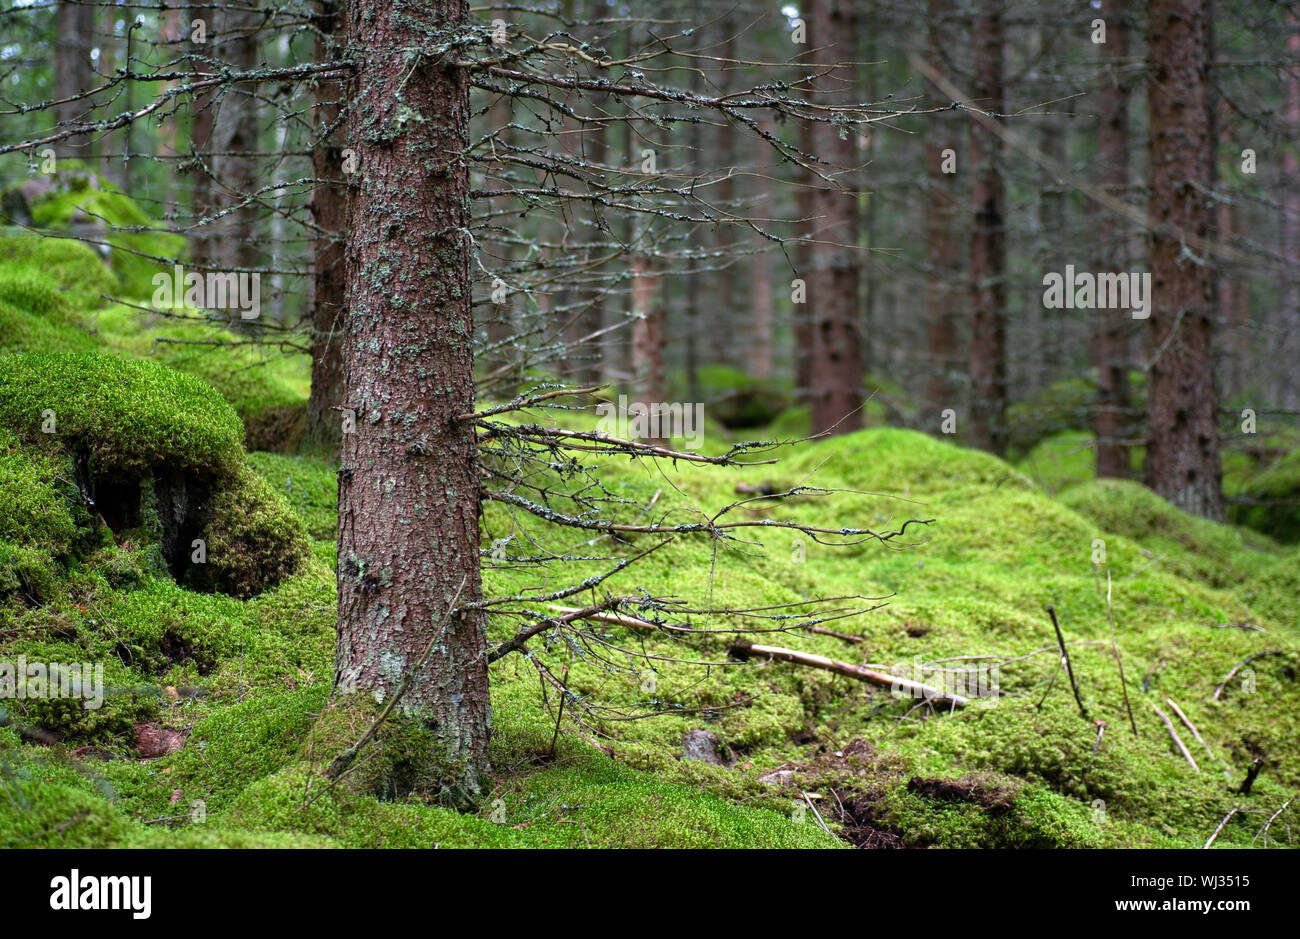 Mossy stones in peaceful Swedish summer forest Stock Photo